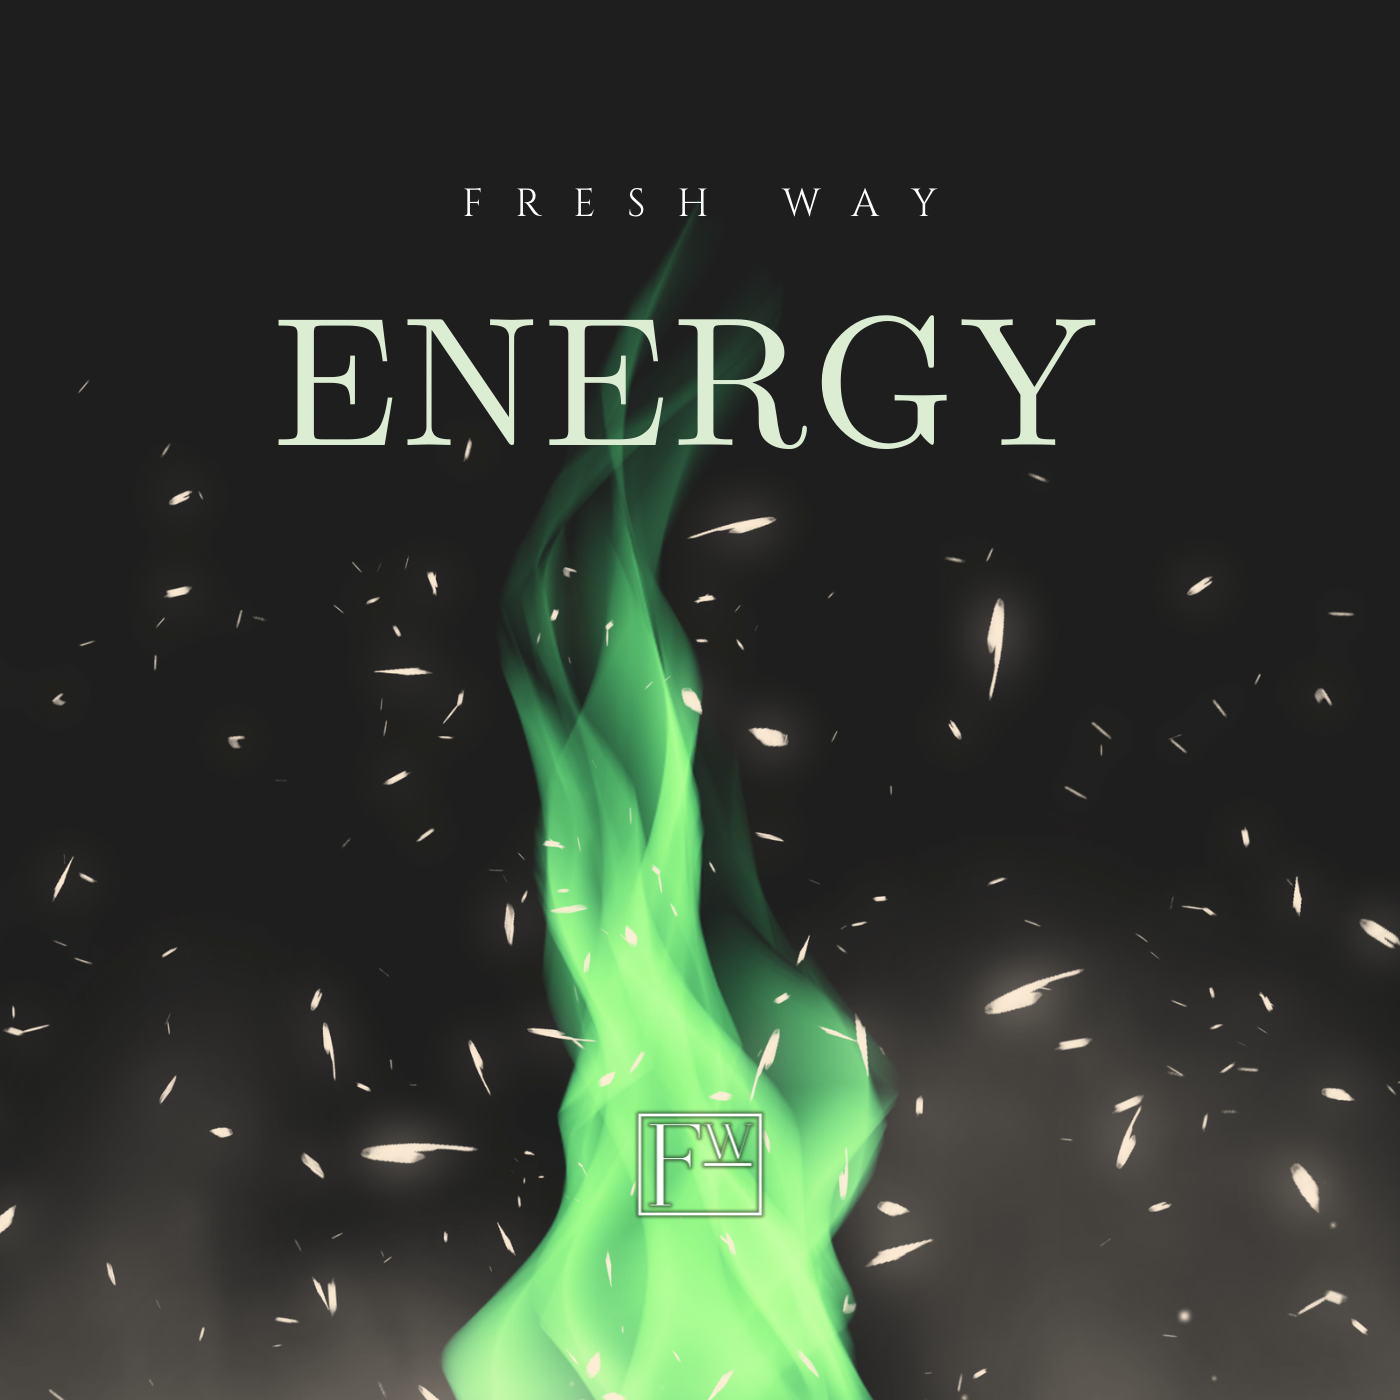 Art for Energy by Fresh Way